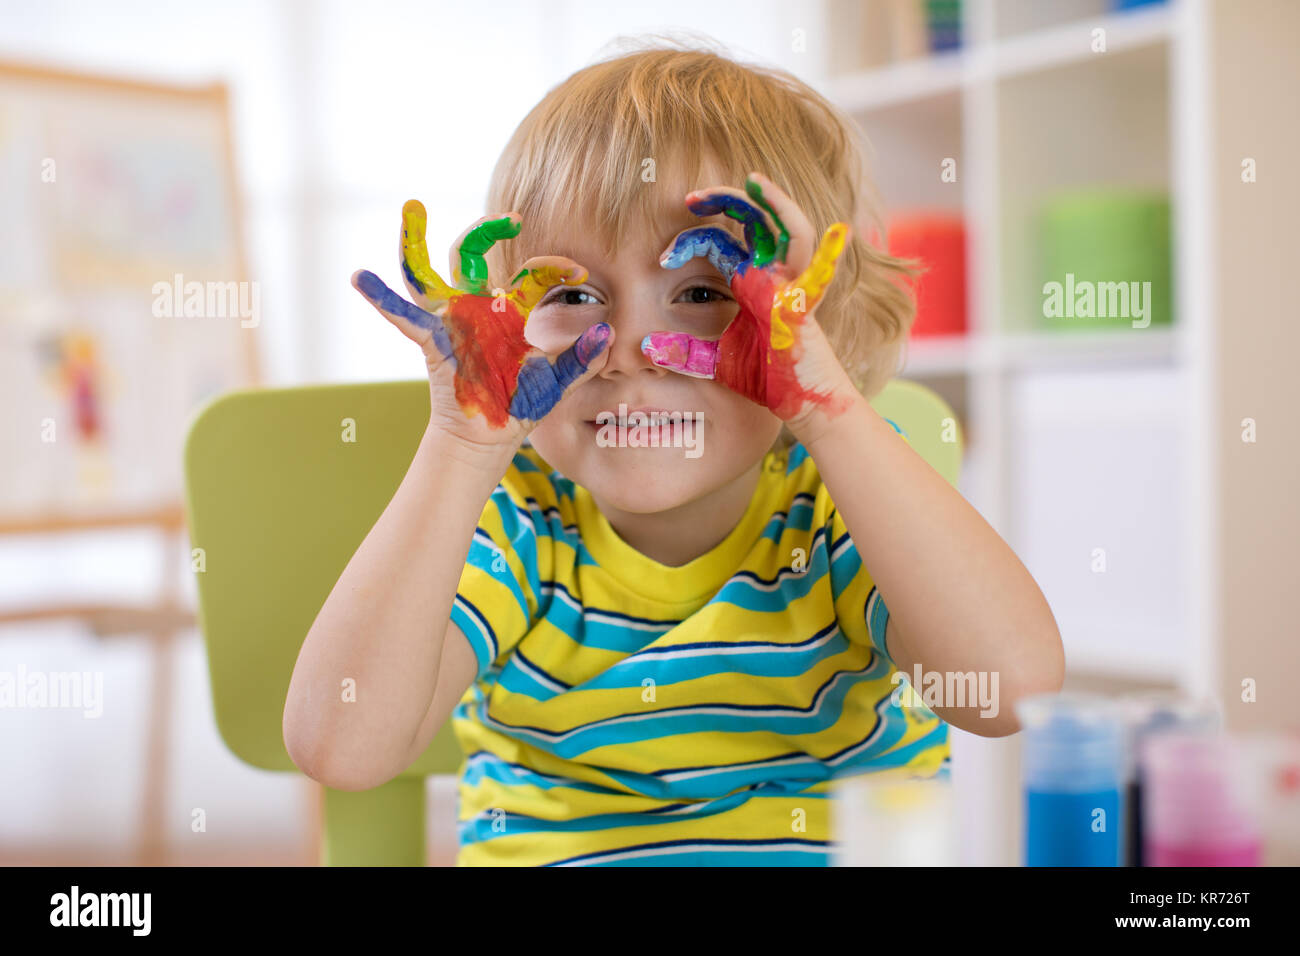 cute cheerful kid with hands painted in bright colors Stock Photo